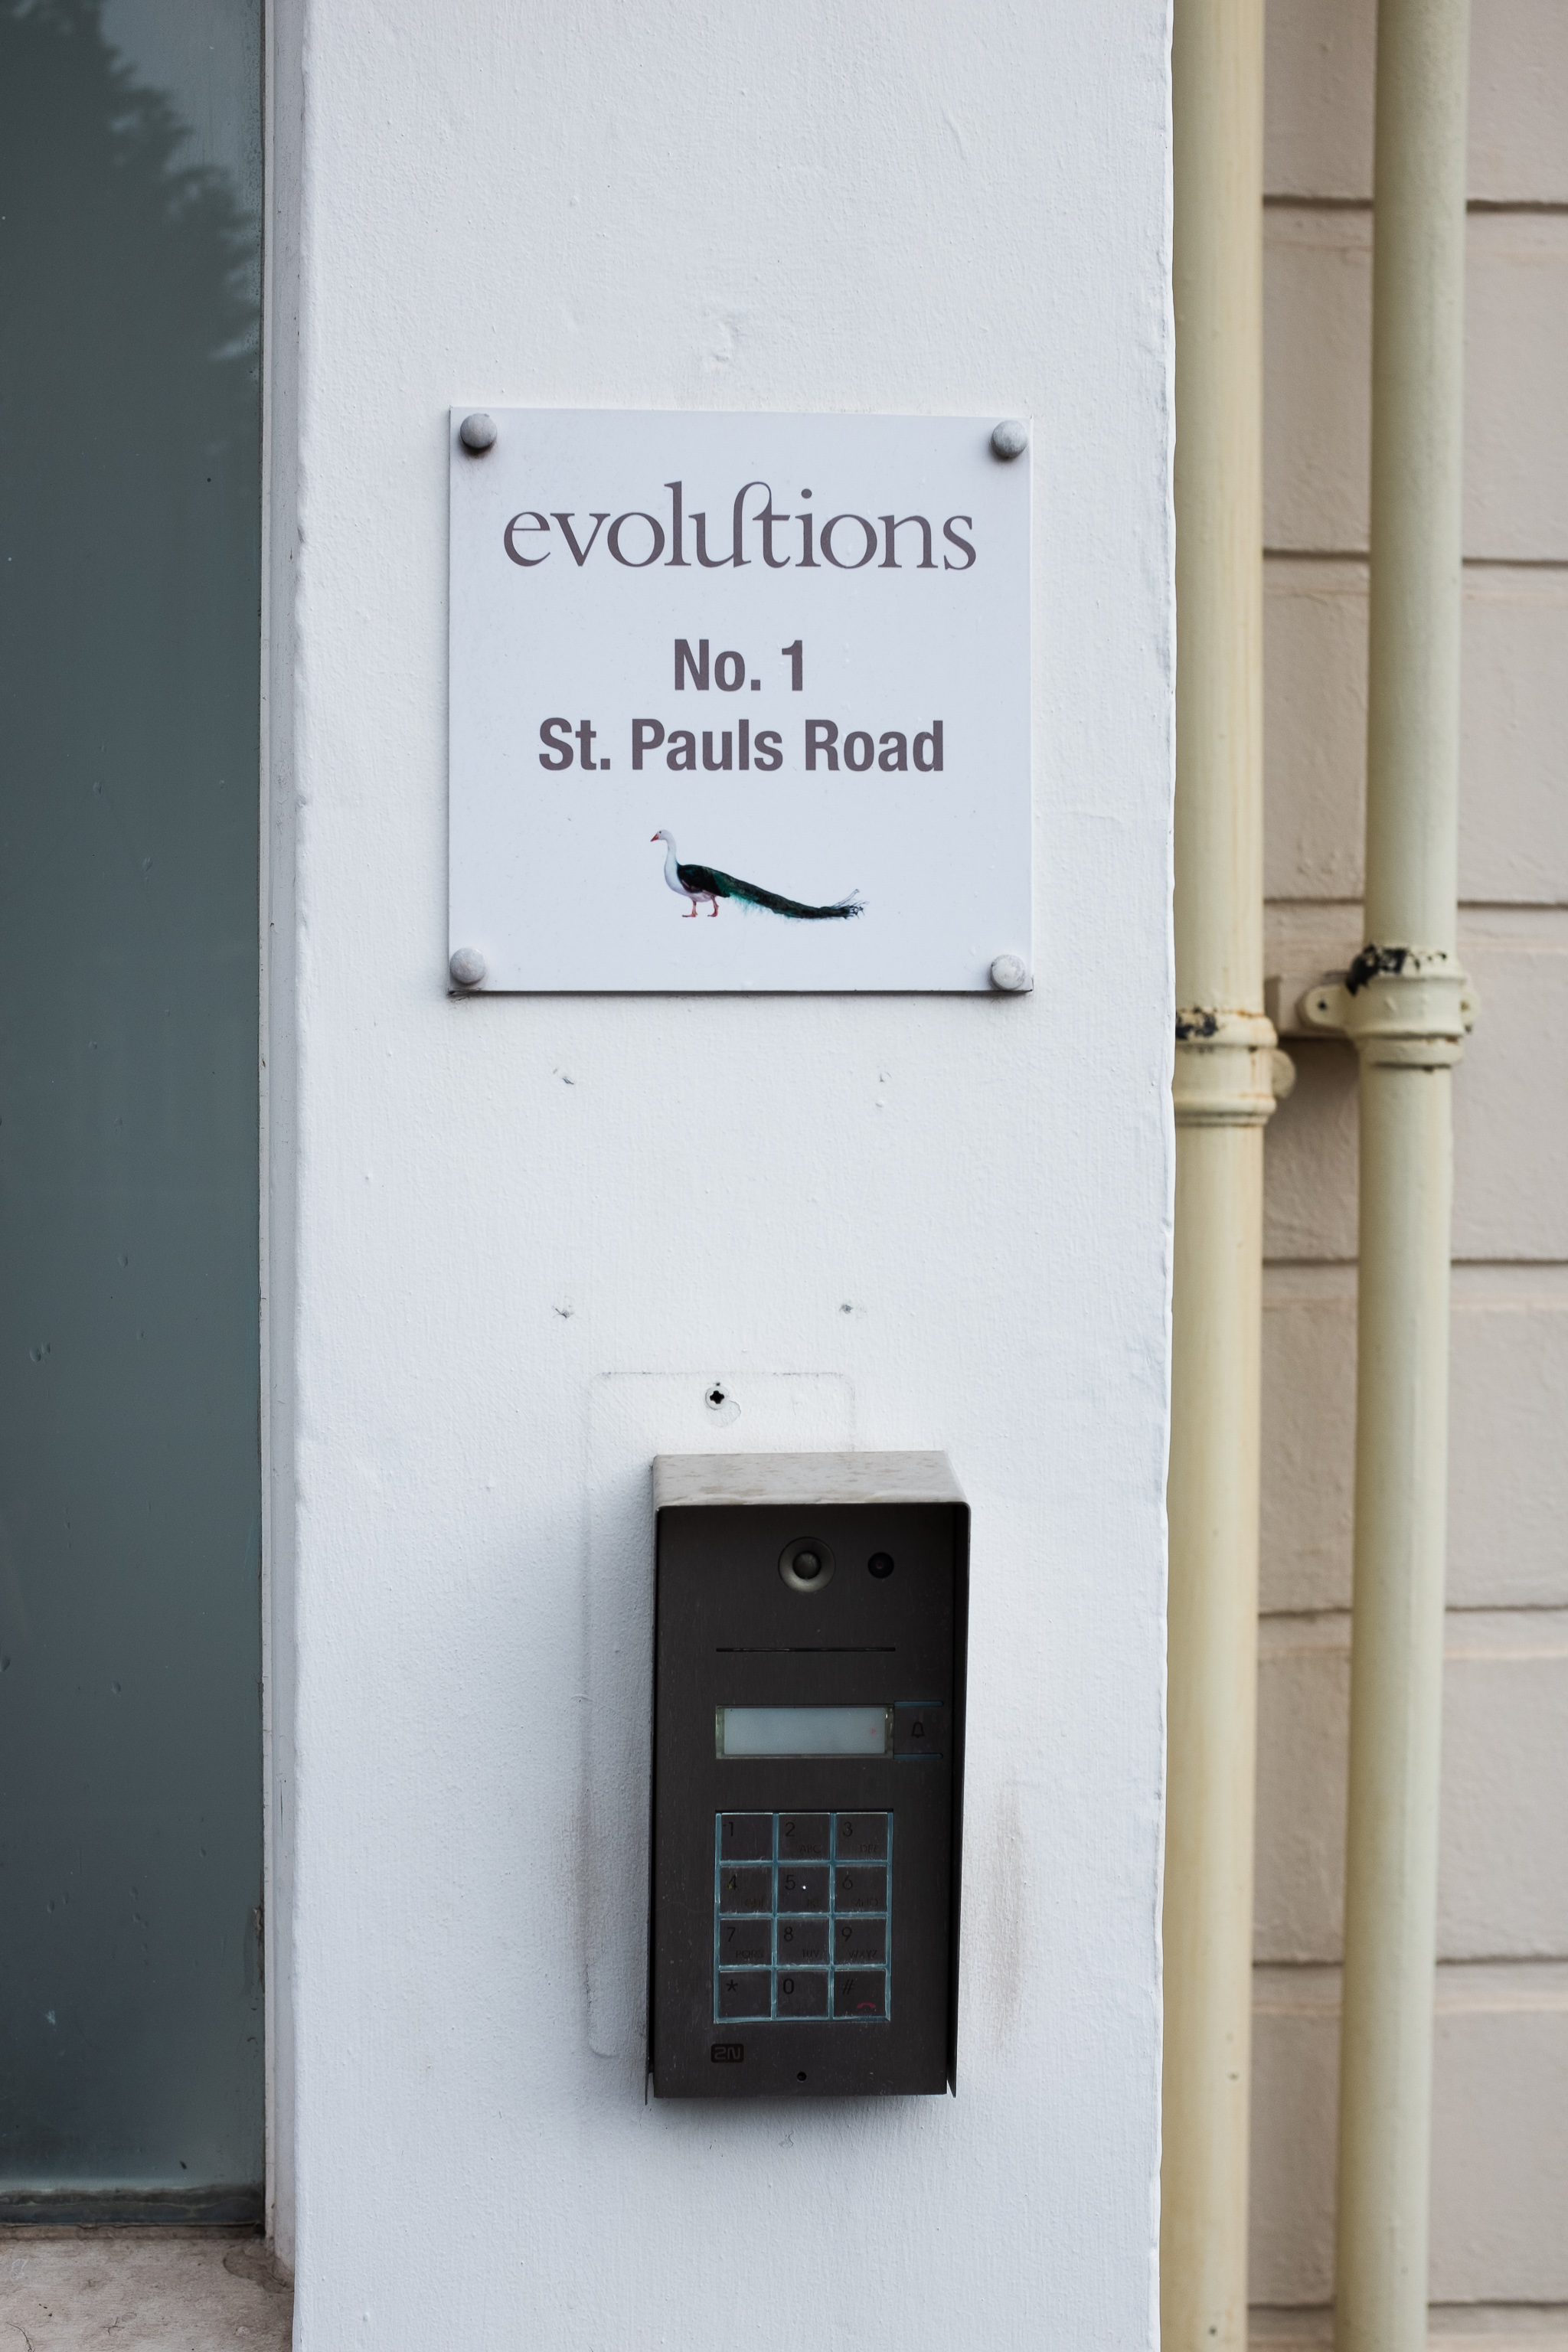 Evolutions
Apparently they're a London-based multimedia production house and this is their first "regional facility". Which presumably explains why they're ju...